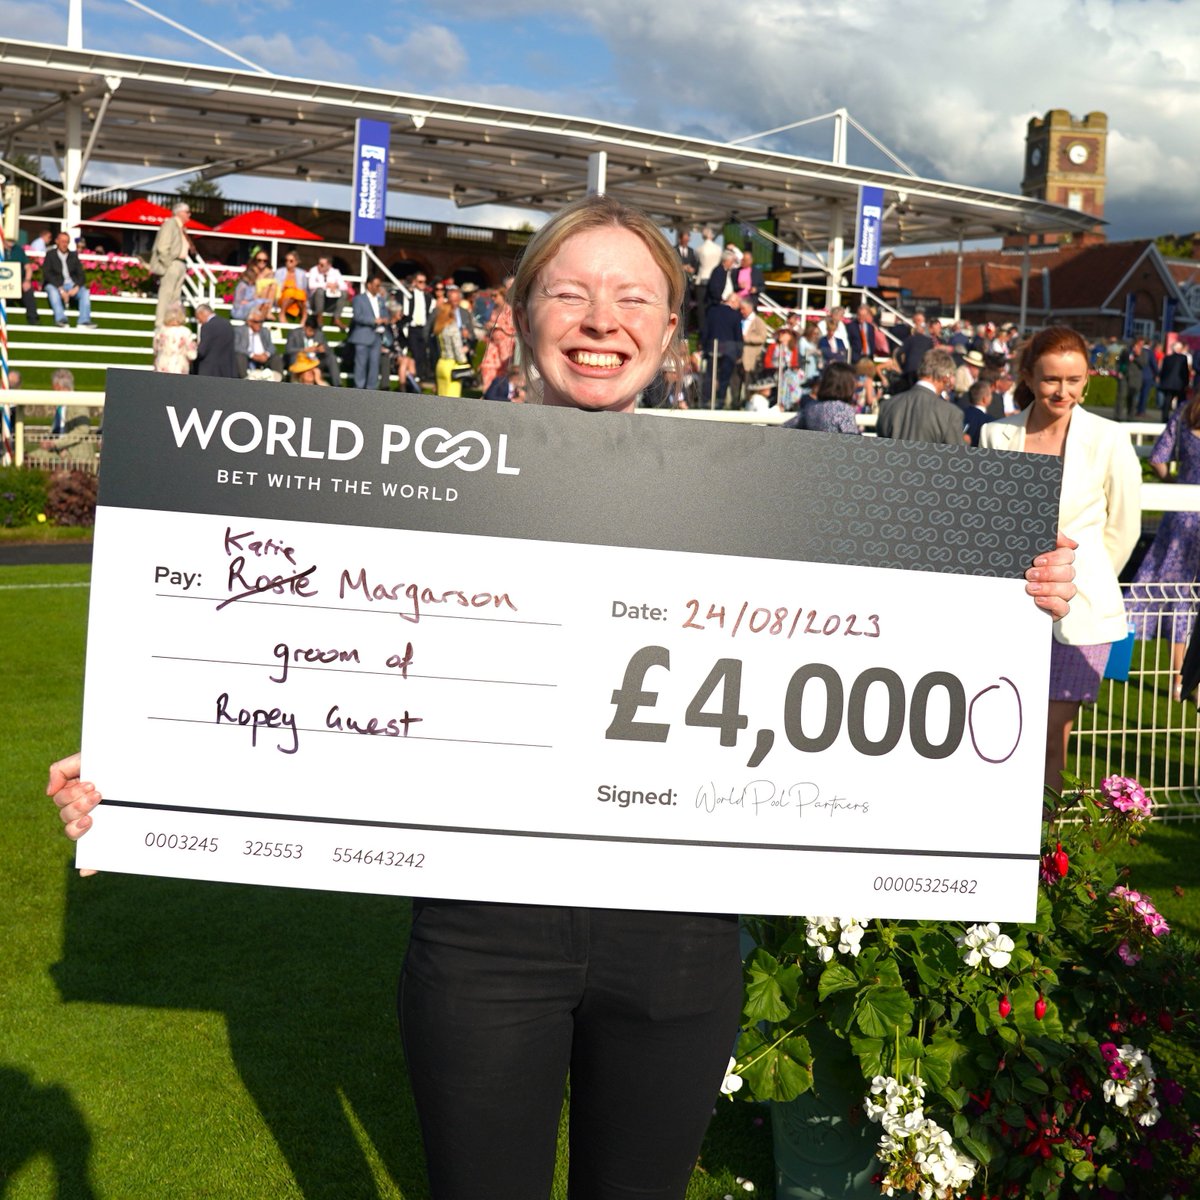 The giant £4,000 cheque is back today! 😆

Our first 𝑴𝒐𝒎𝒆𝒏𝒕 𝒐𝒇 𝒕𝒉𝒆 𝑫𝒂𝒚 in the UK for 2024 will be picked from one of the nine races @NewmarketRace.

Good luck to all connections.